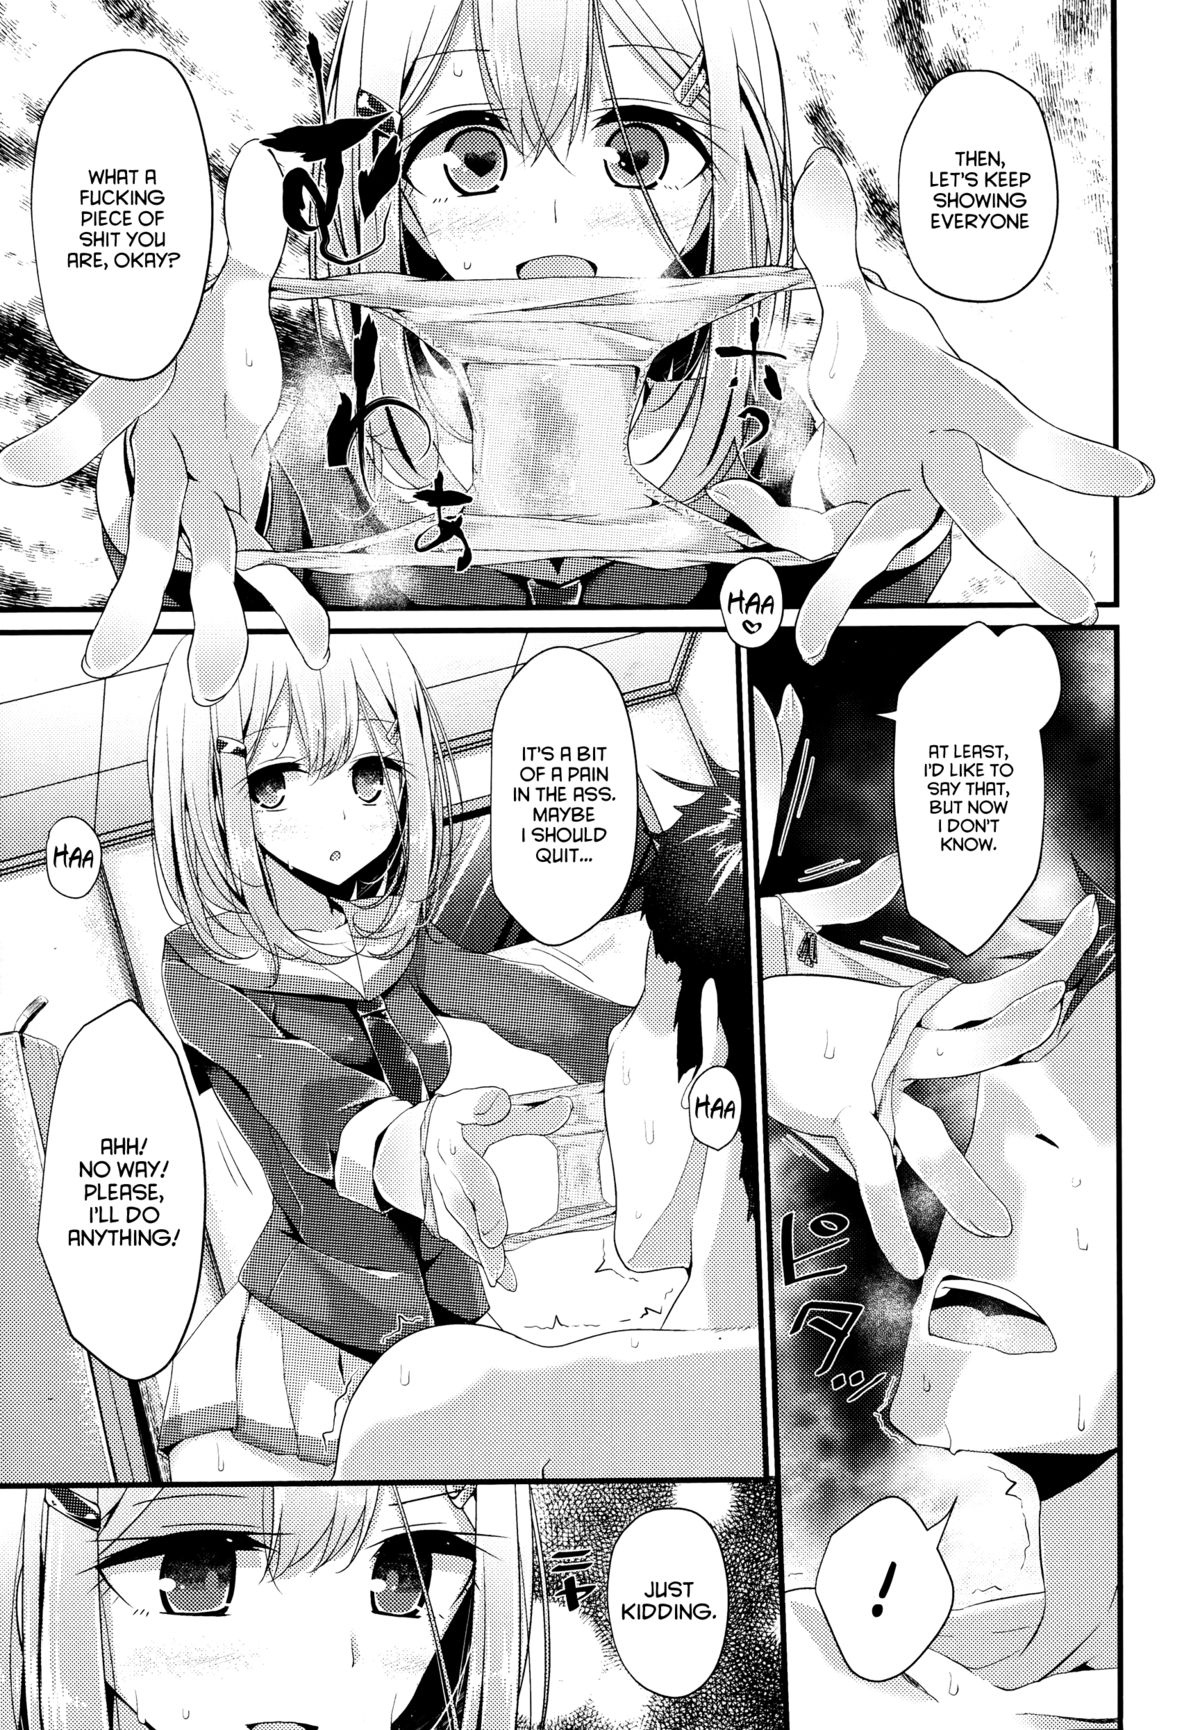 [Oouso] Olfactophilia (Girls forM Vol. 06) [English] =LWB= page 19 full